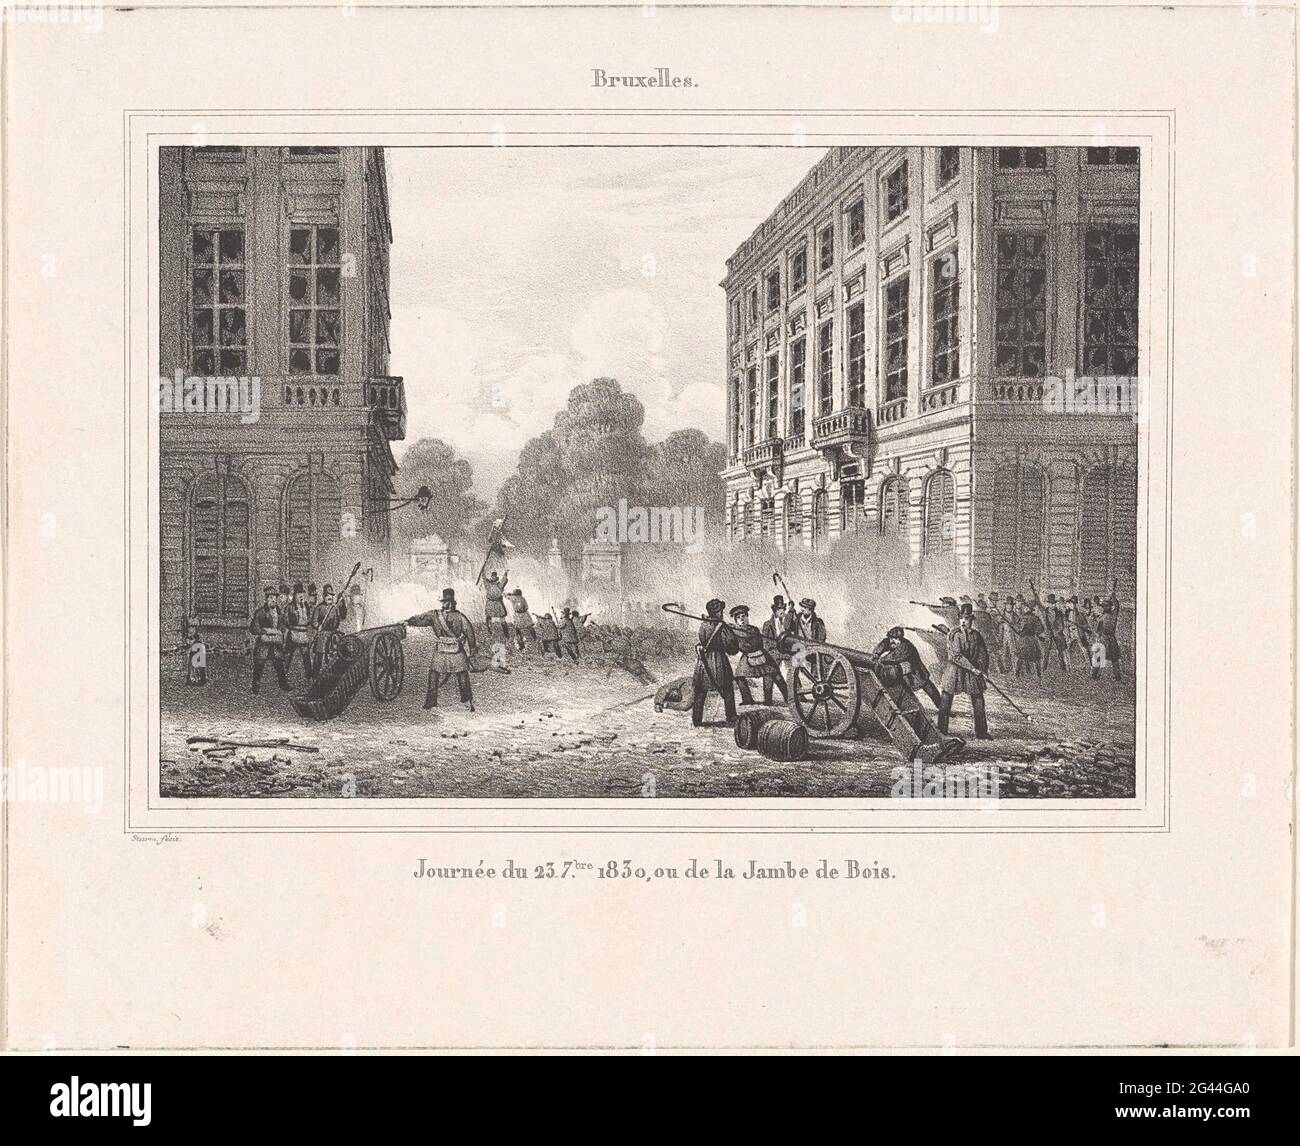 Jambe de Bois behind the guns in Brussels, 1830; Bruxelles. / Journée du 23.7.bre 1830, Ou de la Jambe de Bois; Prints added to the EVÉTELENS series de Bruxelles, Anvers (...) (1831). Fighting in a street at the entrance to the park. The Belgian insurgents, including Jambe de Bois, shoot with guns on the Dutch troops, 23 September 1830. Part of a group of prints from various other series related to the records in recuueil about the events during the Belgian revolution in Brussels, Antwerp and Antwerp Other cities in the period 25 August 1830 to 27 March 1831. Stock Photo